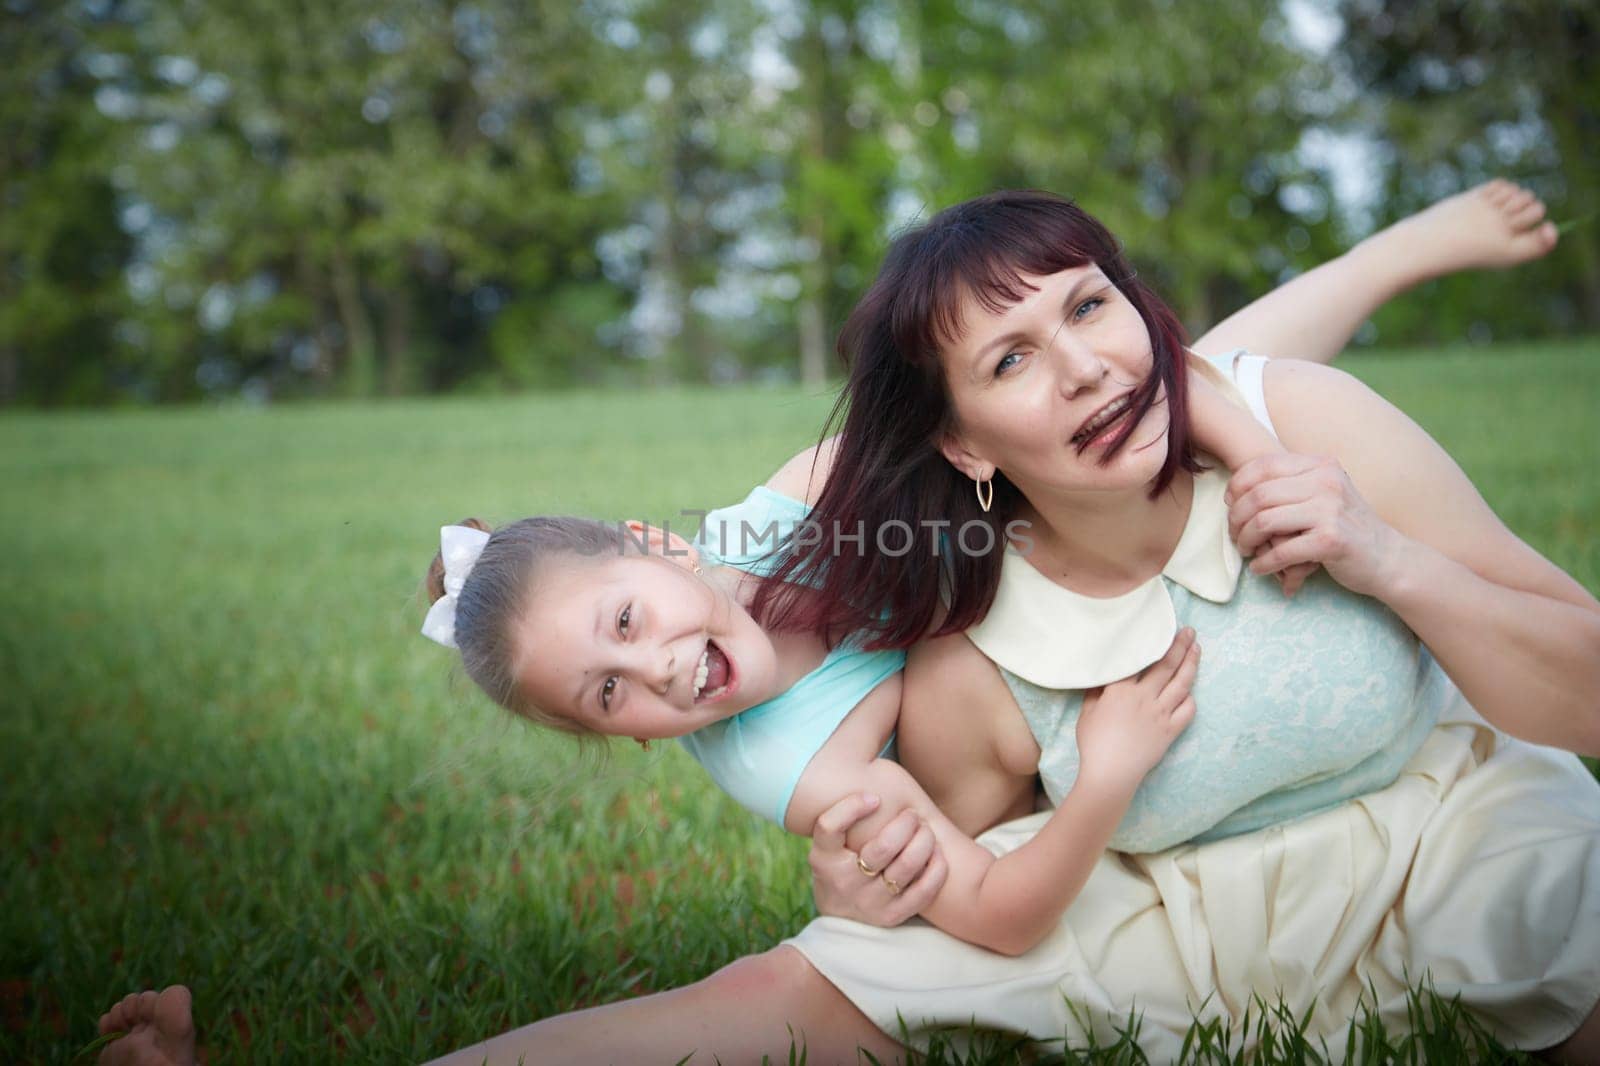 Happy mother and daughter enjoying rest, playing and fun on nature on a green lawn and with a blooming apple tree in the background. Woman and girl resting outdoors in summer and spring day by keleny